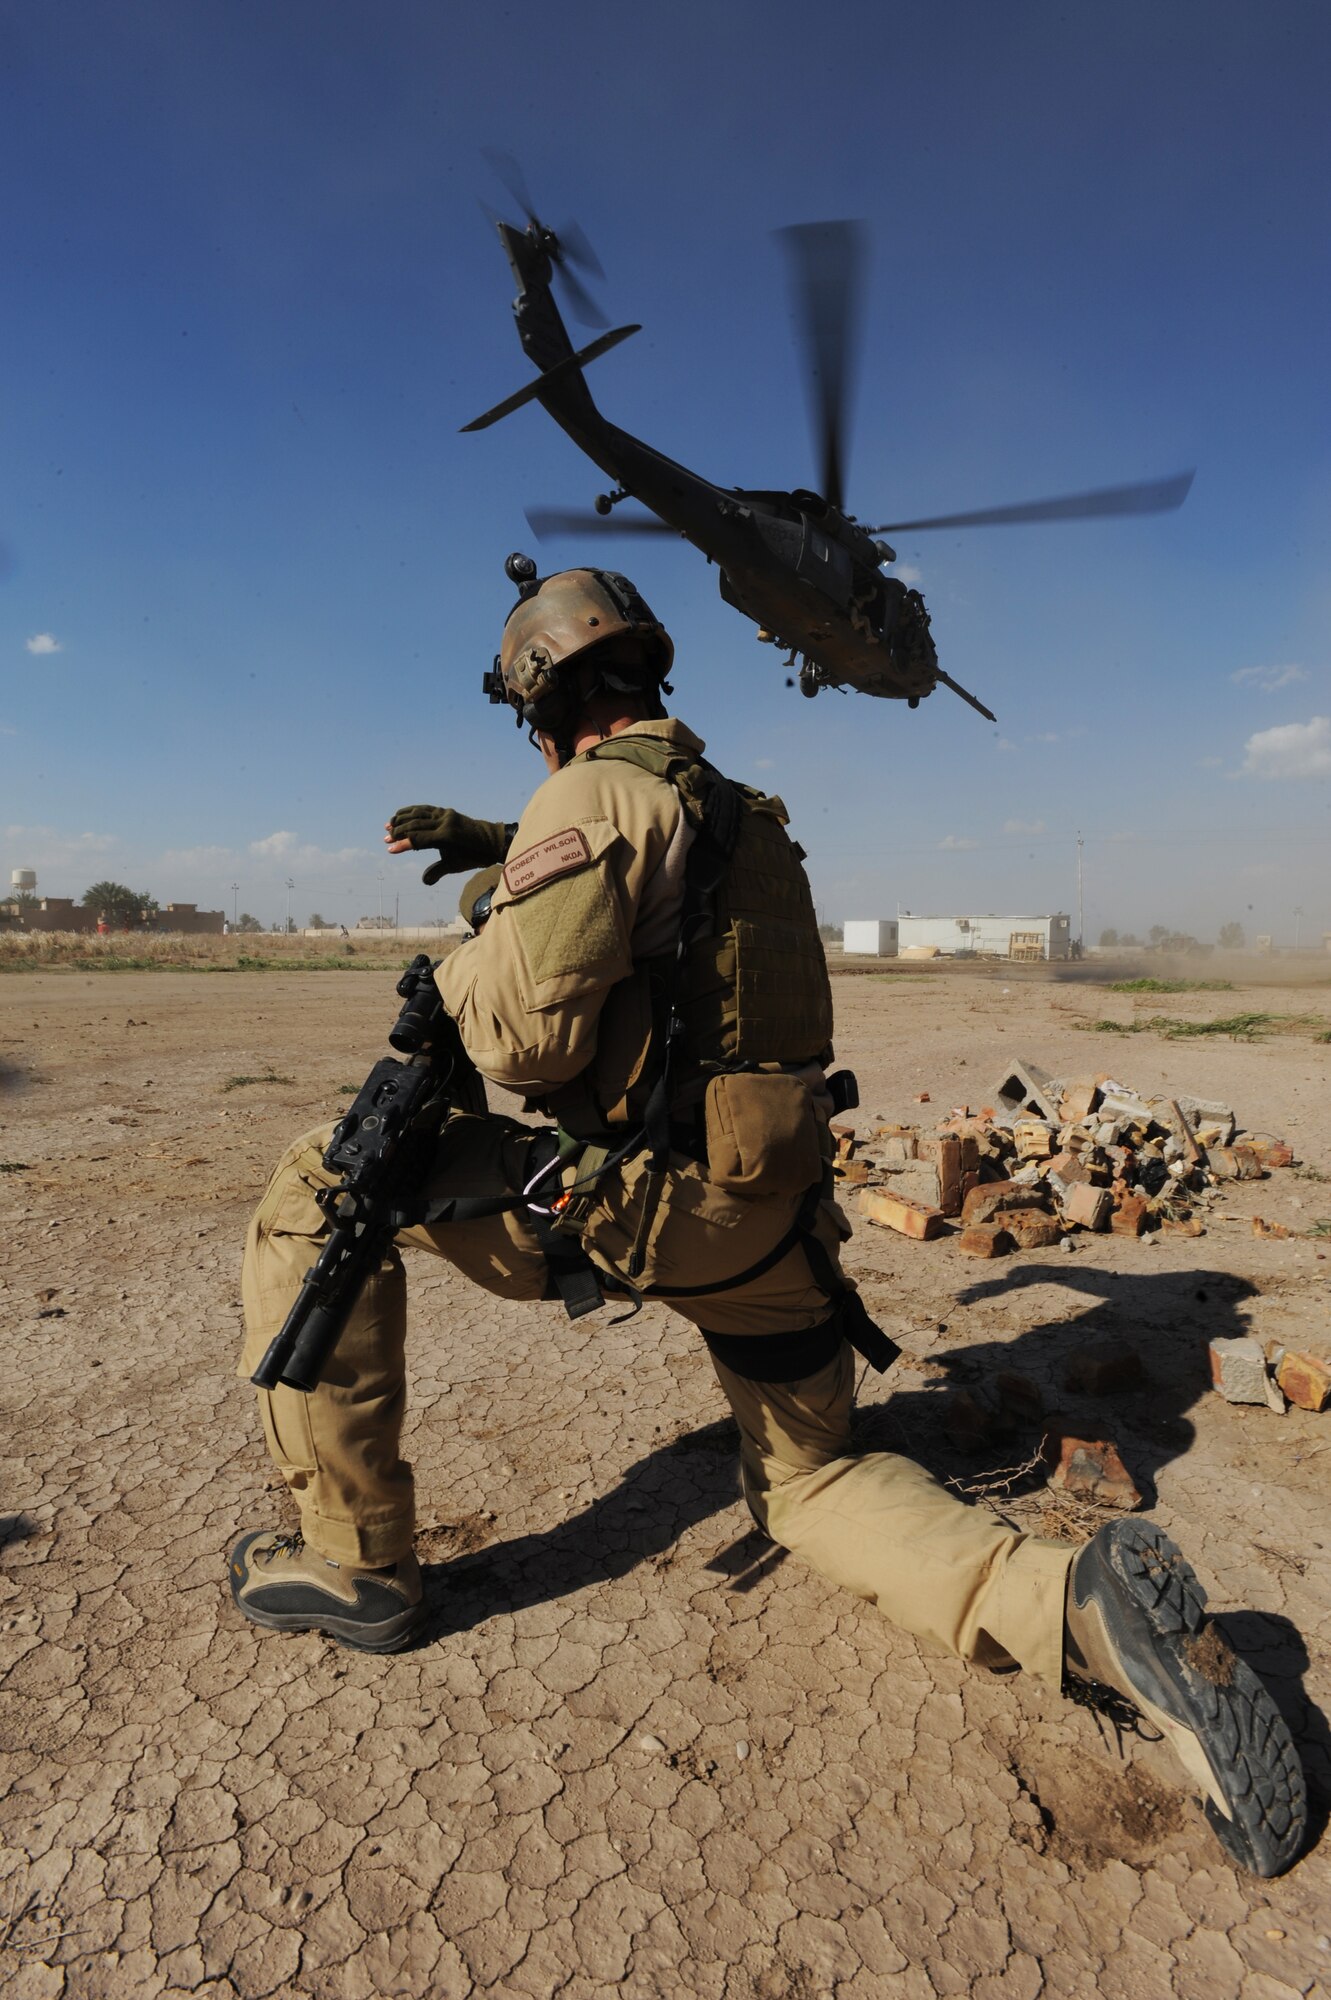 U.S. Air Force Combat Rescue Officer Capt. Robert Wilson, assigned to the 64th Expeditionary Rescue Squadron, Joint Base Balad, Iraq, conducts security for an HH-60 Pavehawk helicopter during proficiency training April 10, 2009, in support of Operation Iraqi Freedom.  (U.S. Air Force photo by Staff Sgt. James L. Harper Jr.)